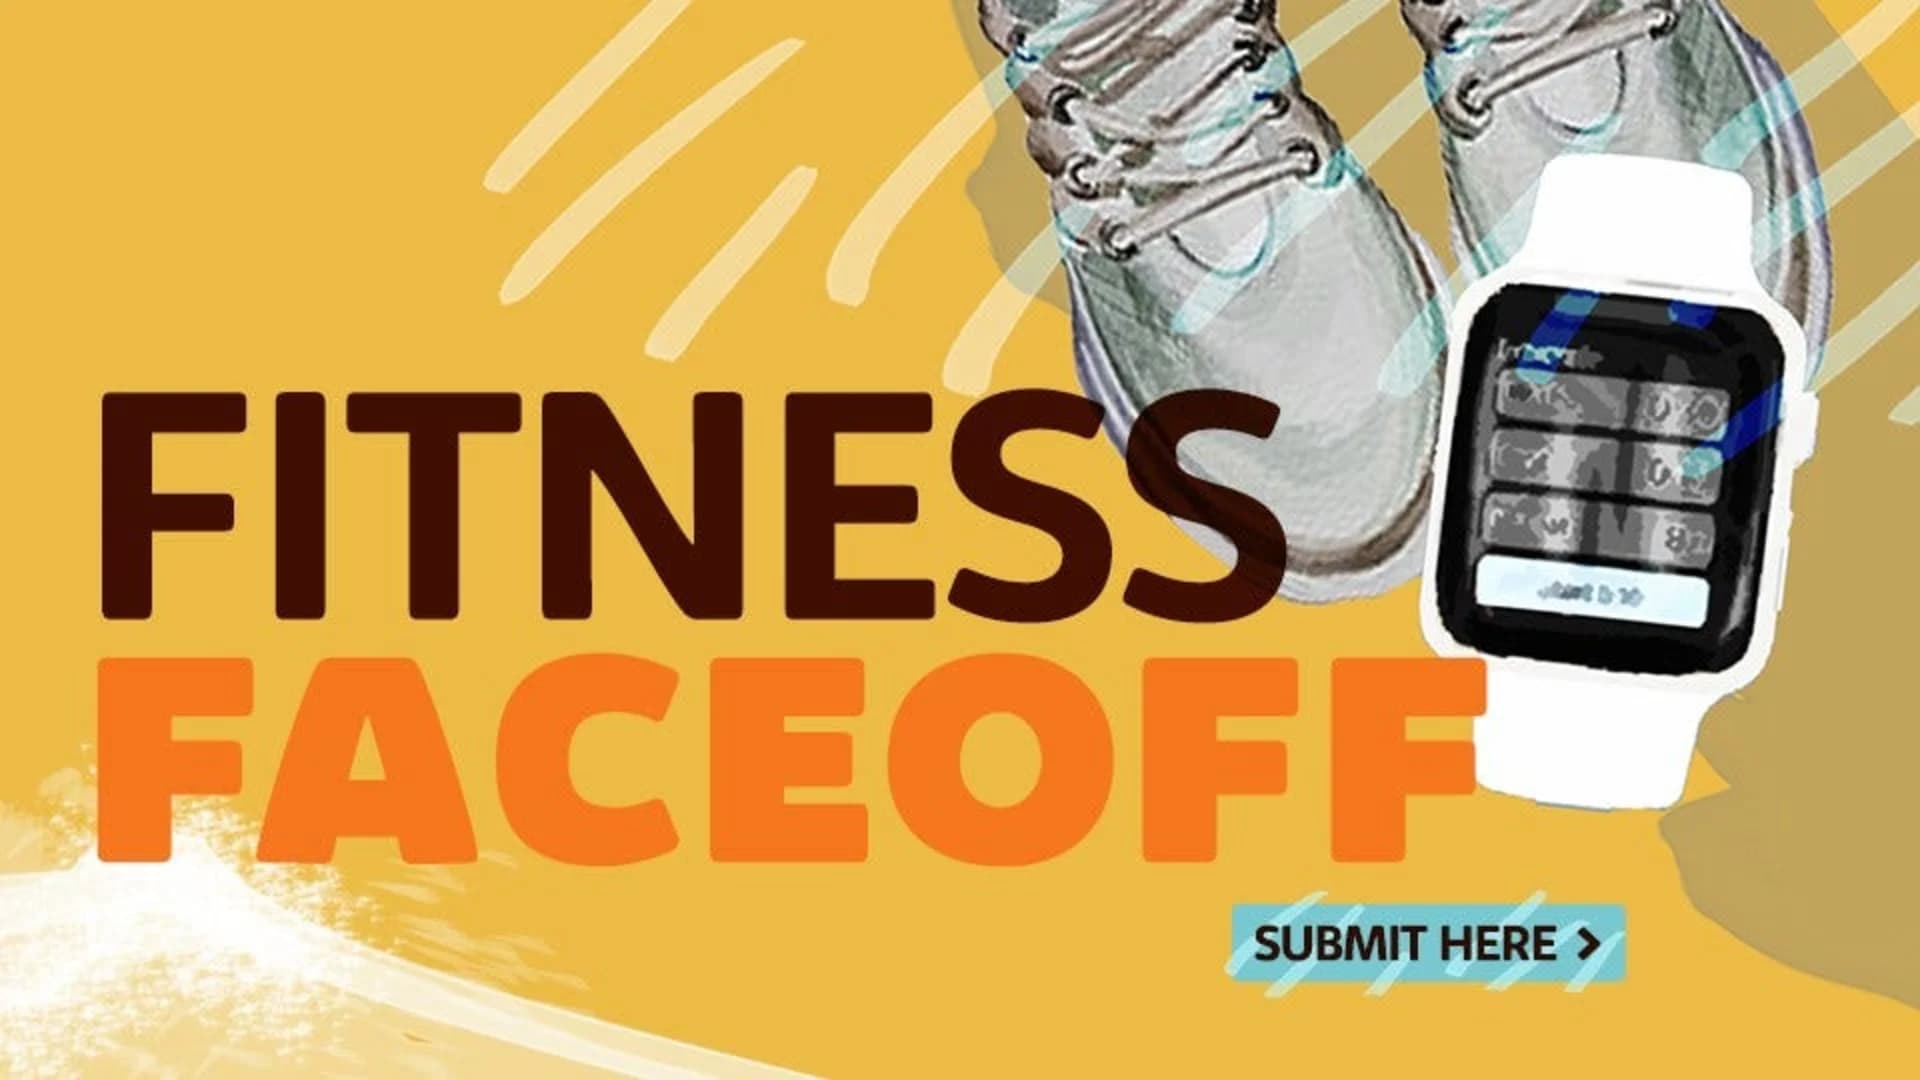 Fitness Face-off crosses the finish line in the Hudson Valley